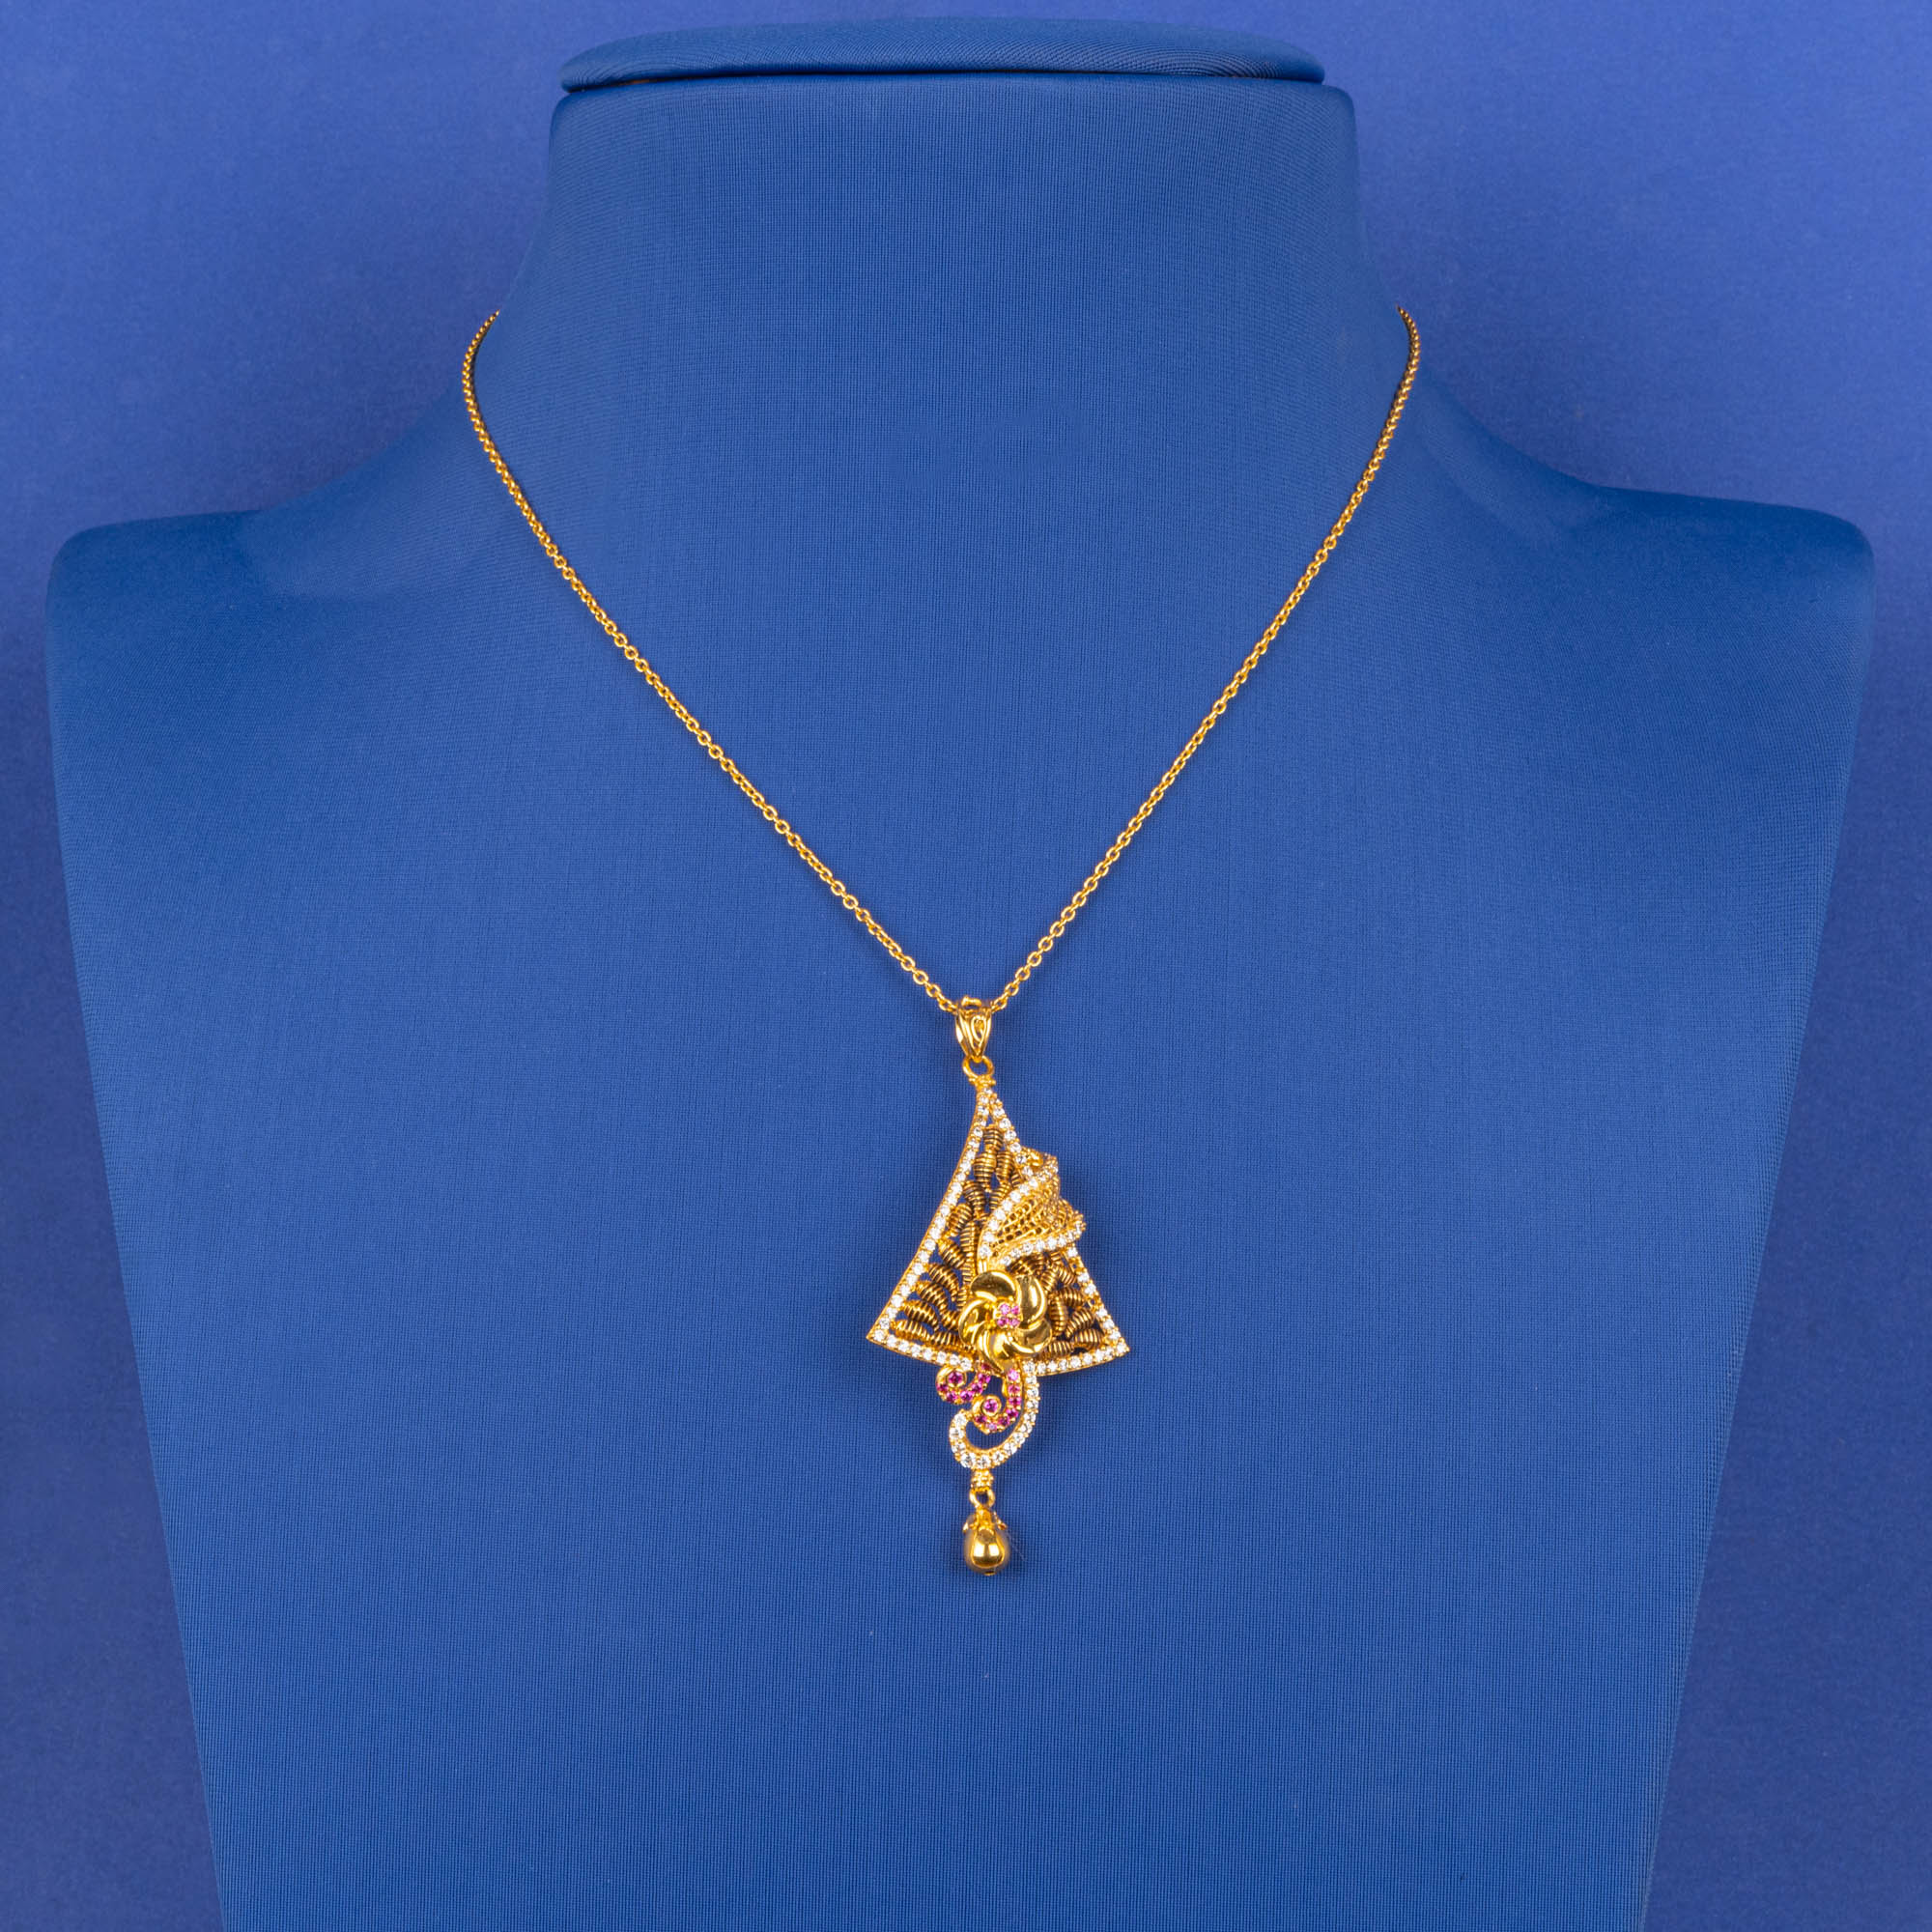 Divine Harmony: Handmade 22K Gold Cz God Pendant with Intricate Embellishments (chain not included)